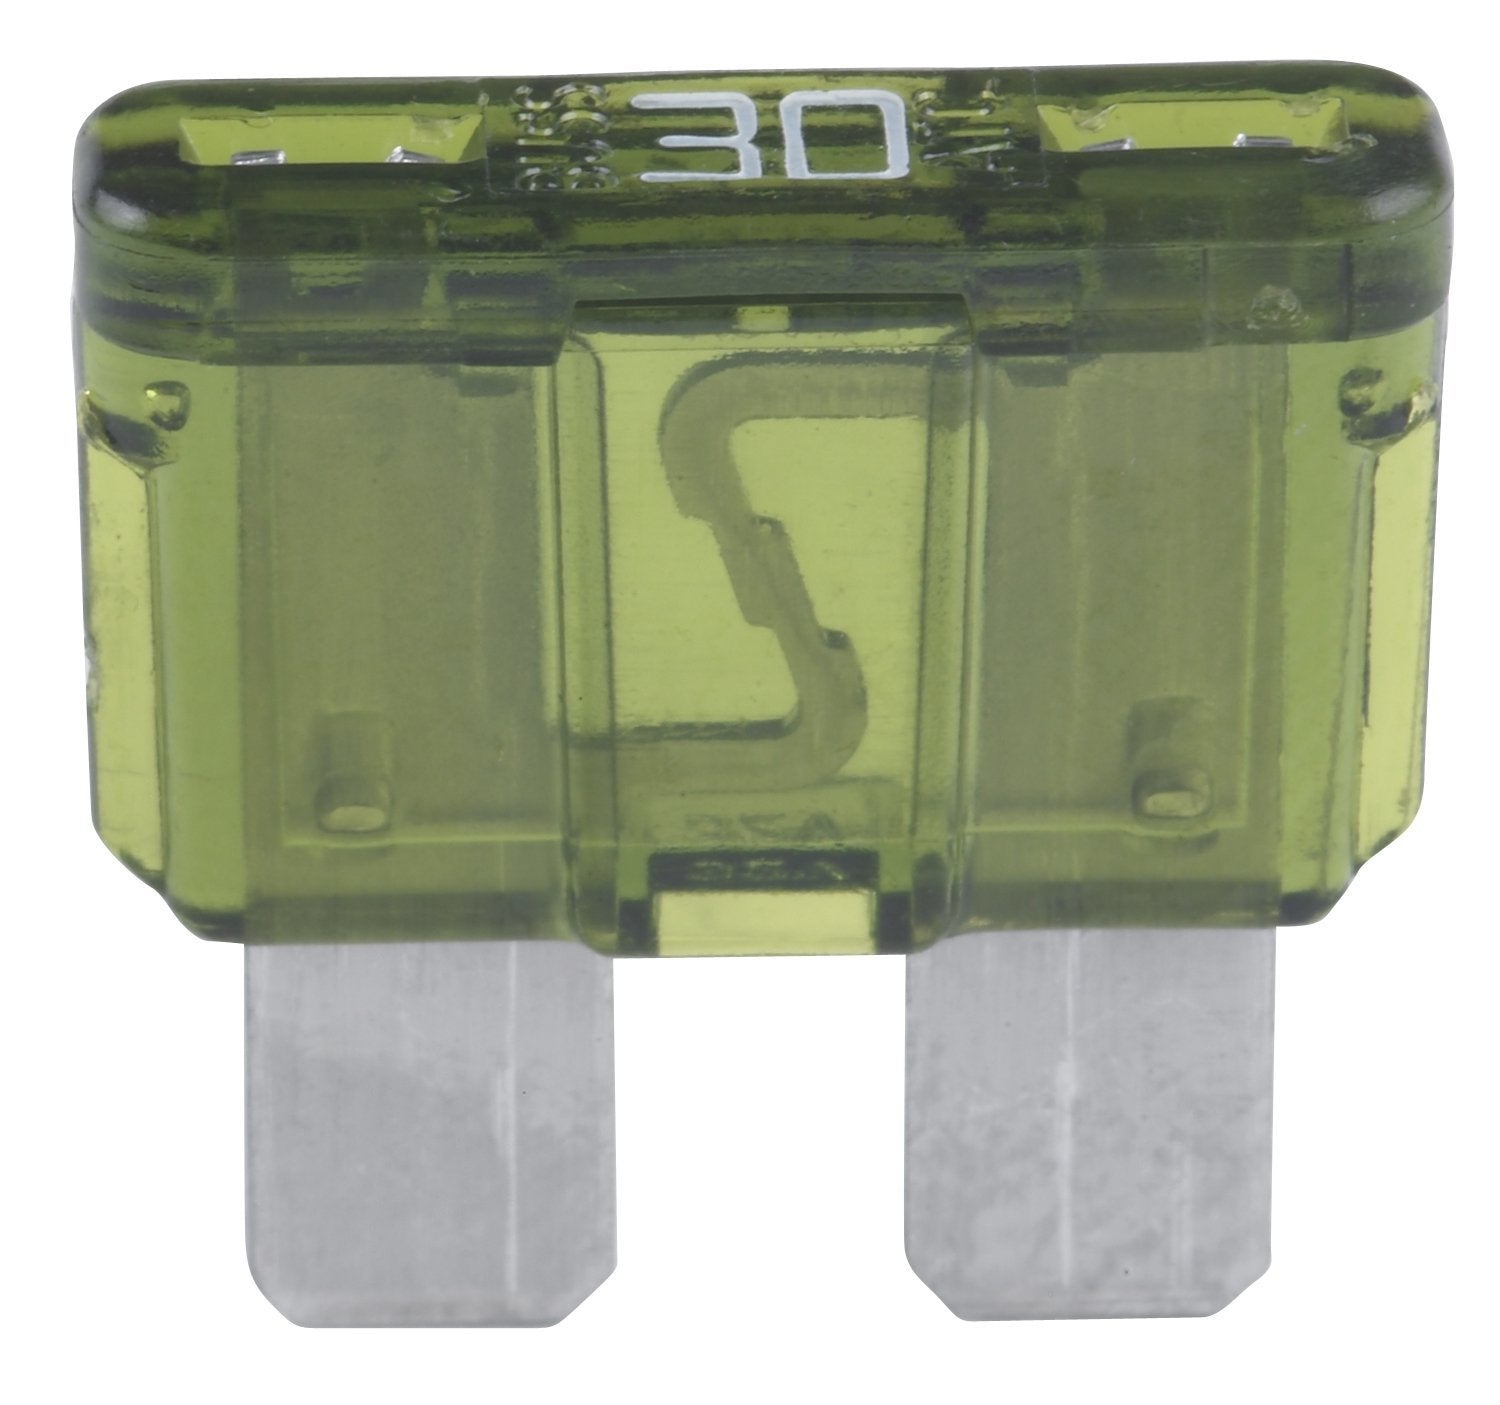 COOPER BUSSMANN BK/ATC-30 FUSE, BLADE, 30A, 32V, FAST ACTING (10 pieces)